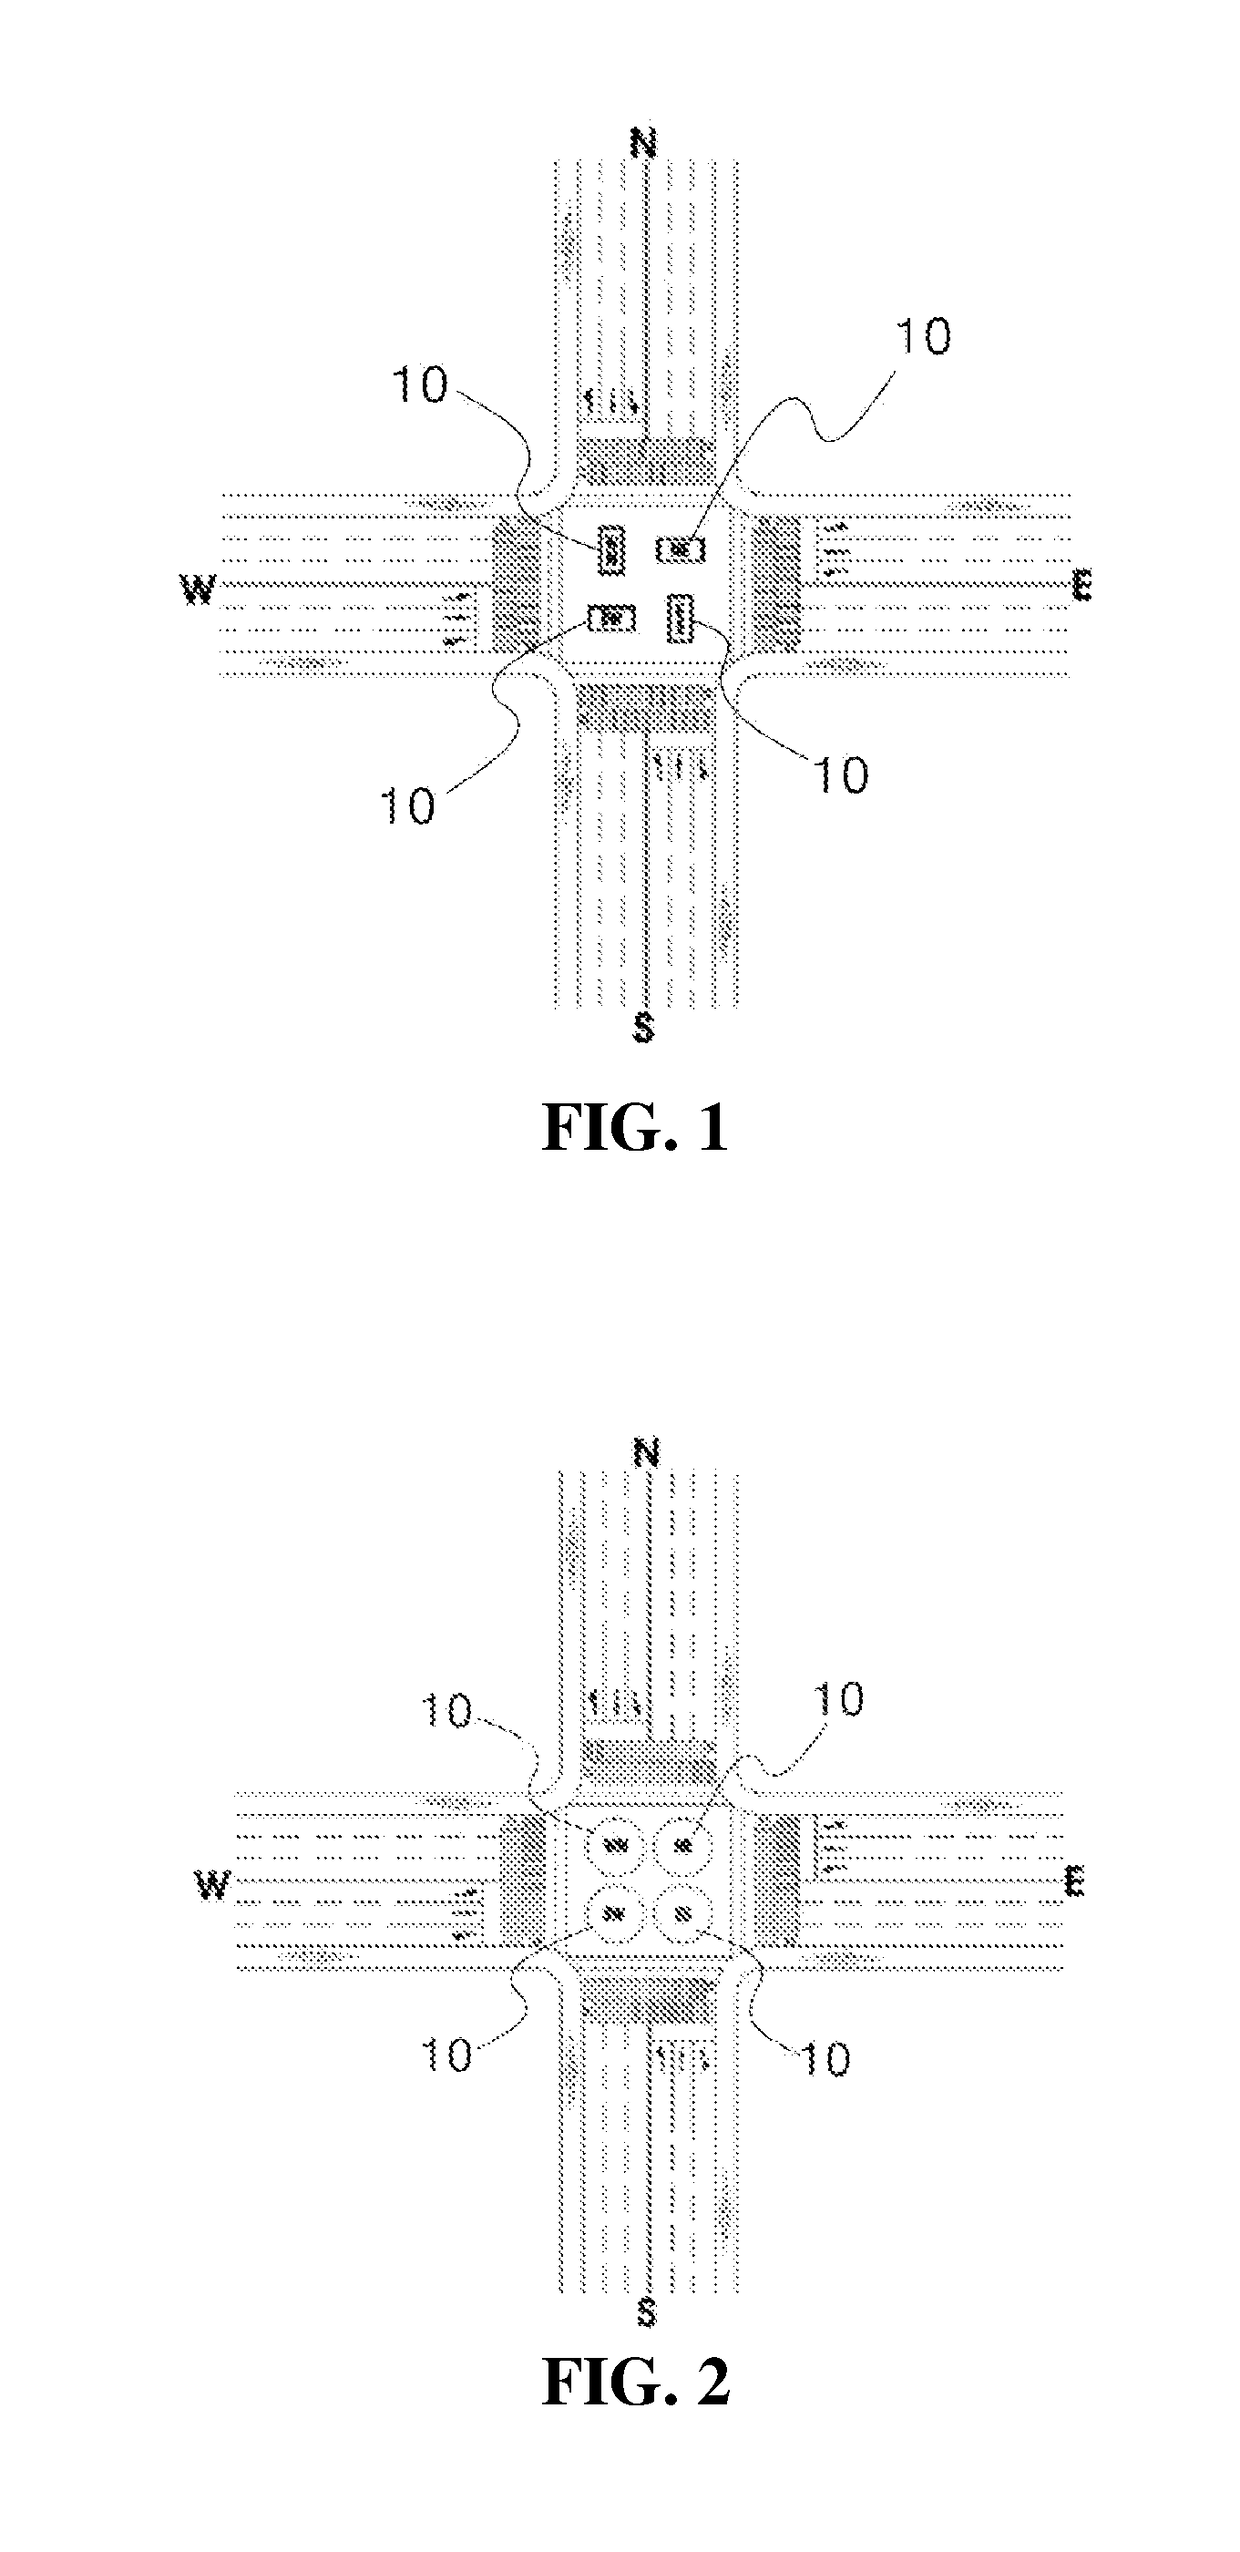 Detection area setting method for detecting passing vehicles, and traffic signal control method using same